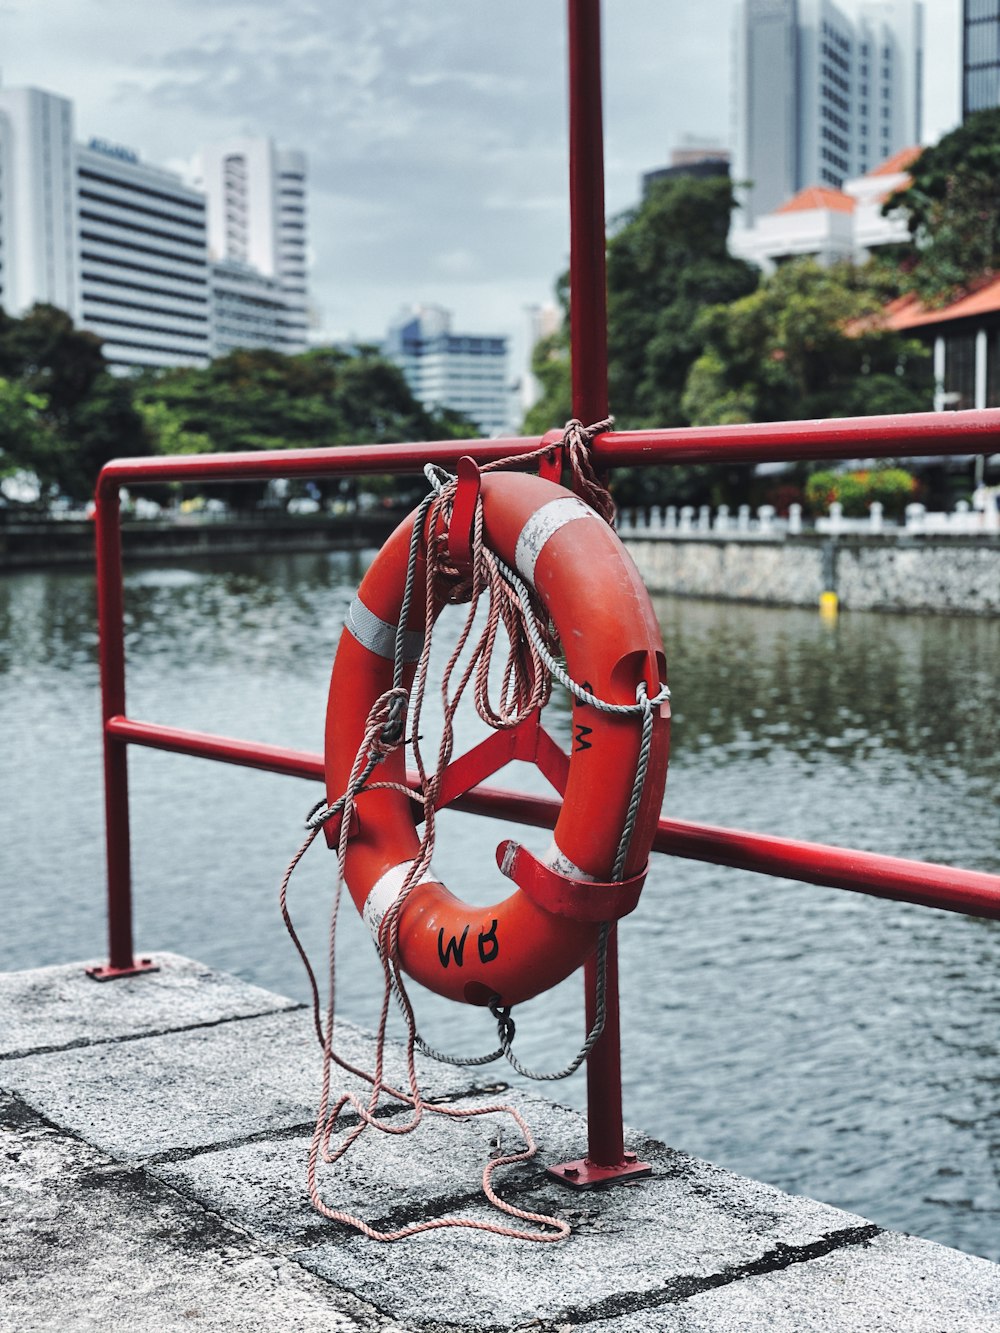 a life preserver sitting on the edge of a body of water